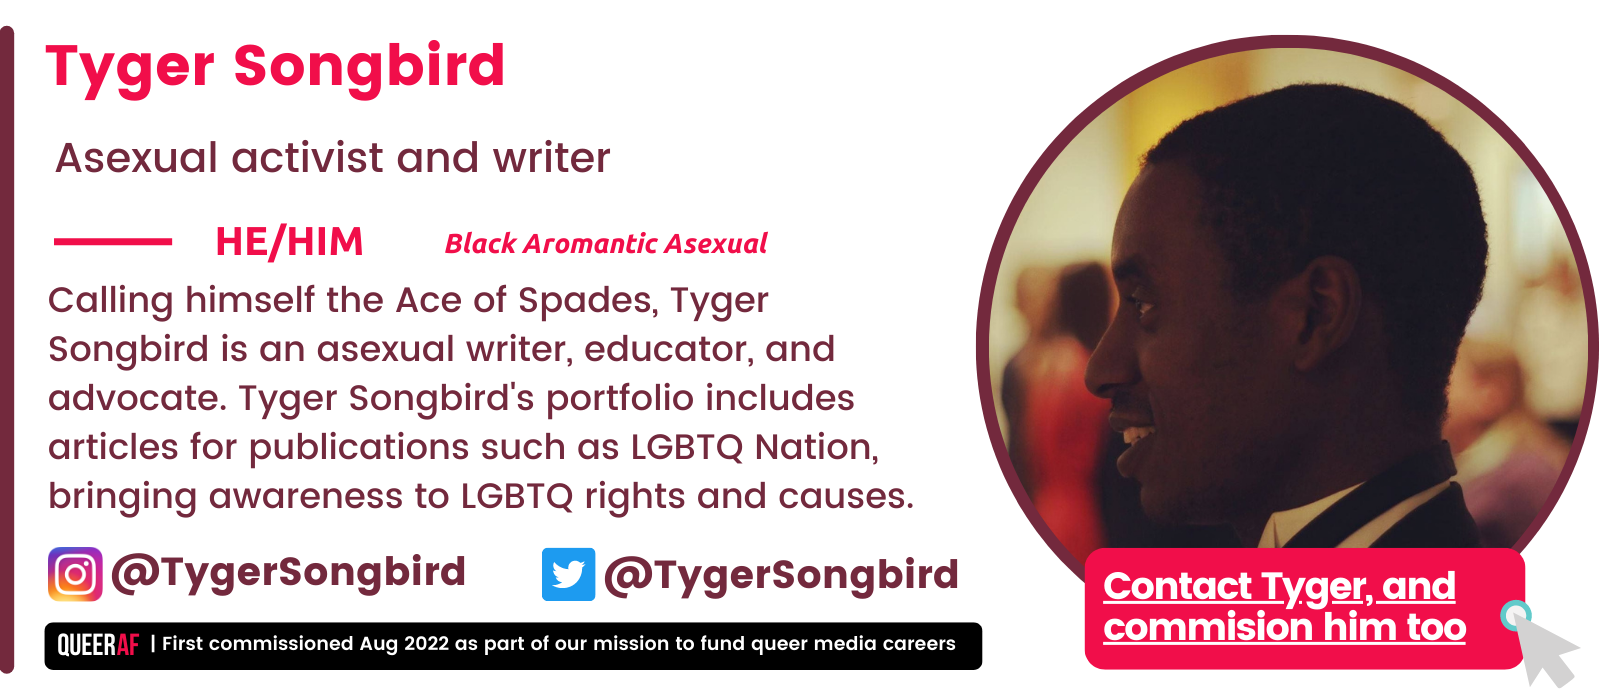 Calling himself the Ace of Spades, Tyger Songbird is an asexual writer, educator, and advocate. Tyger Songbird's portfolio includes articles for publications such as LGBTQ Nation, bringing awareness to LGBTQ rights and causes. He/Him Tyger Songbird Asexual activist and writer Black Aromantic Asexual